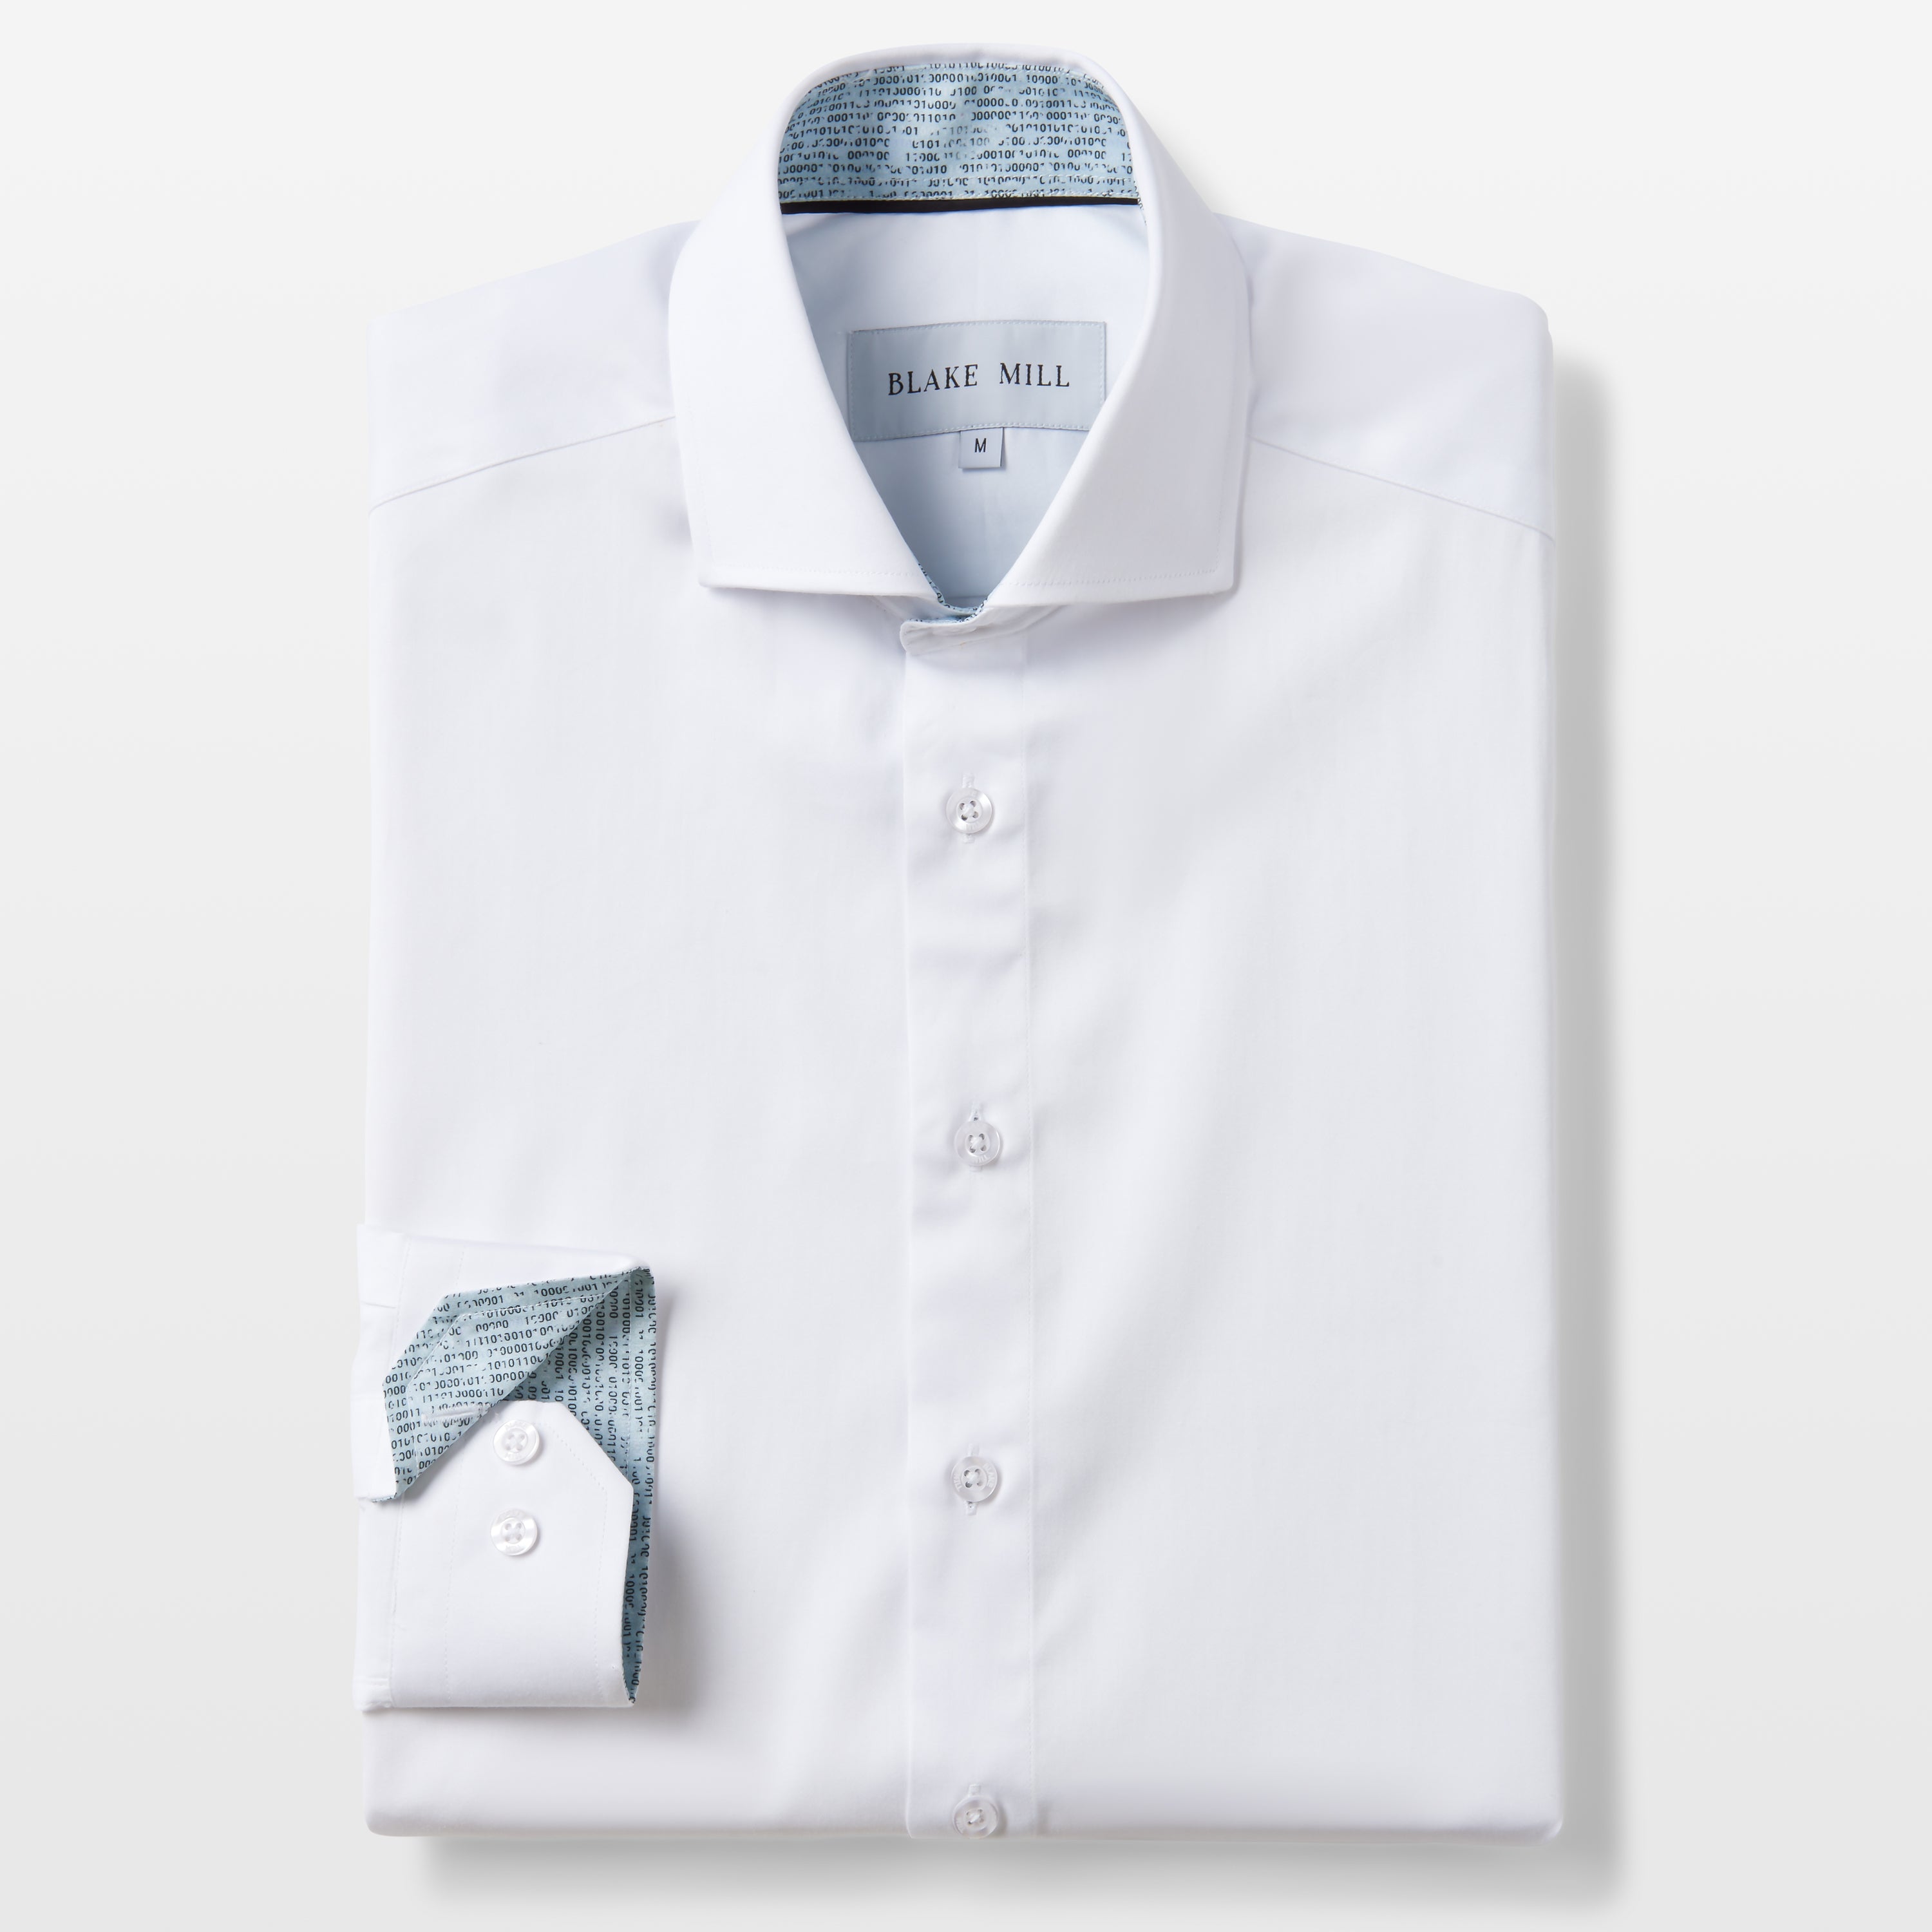 White with Teal Burn Baby Burn Accents Shirt